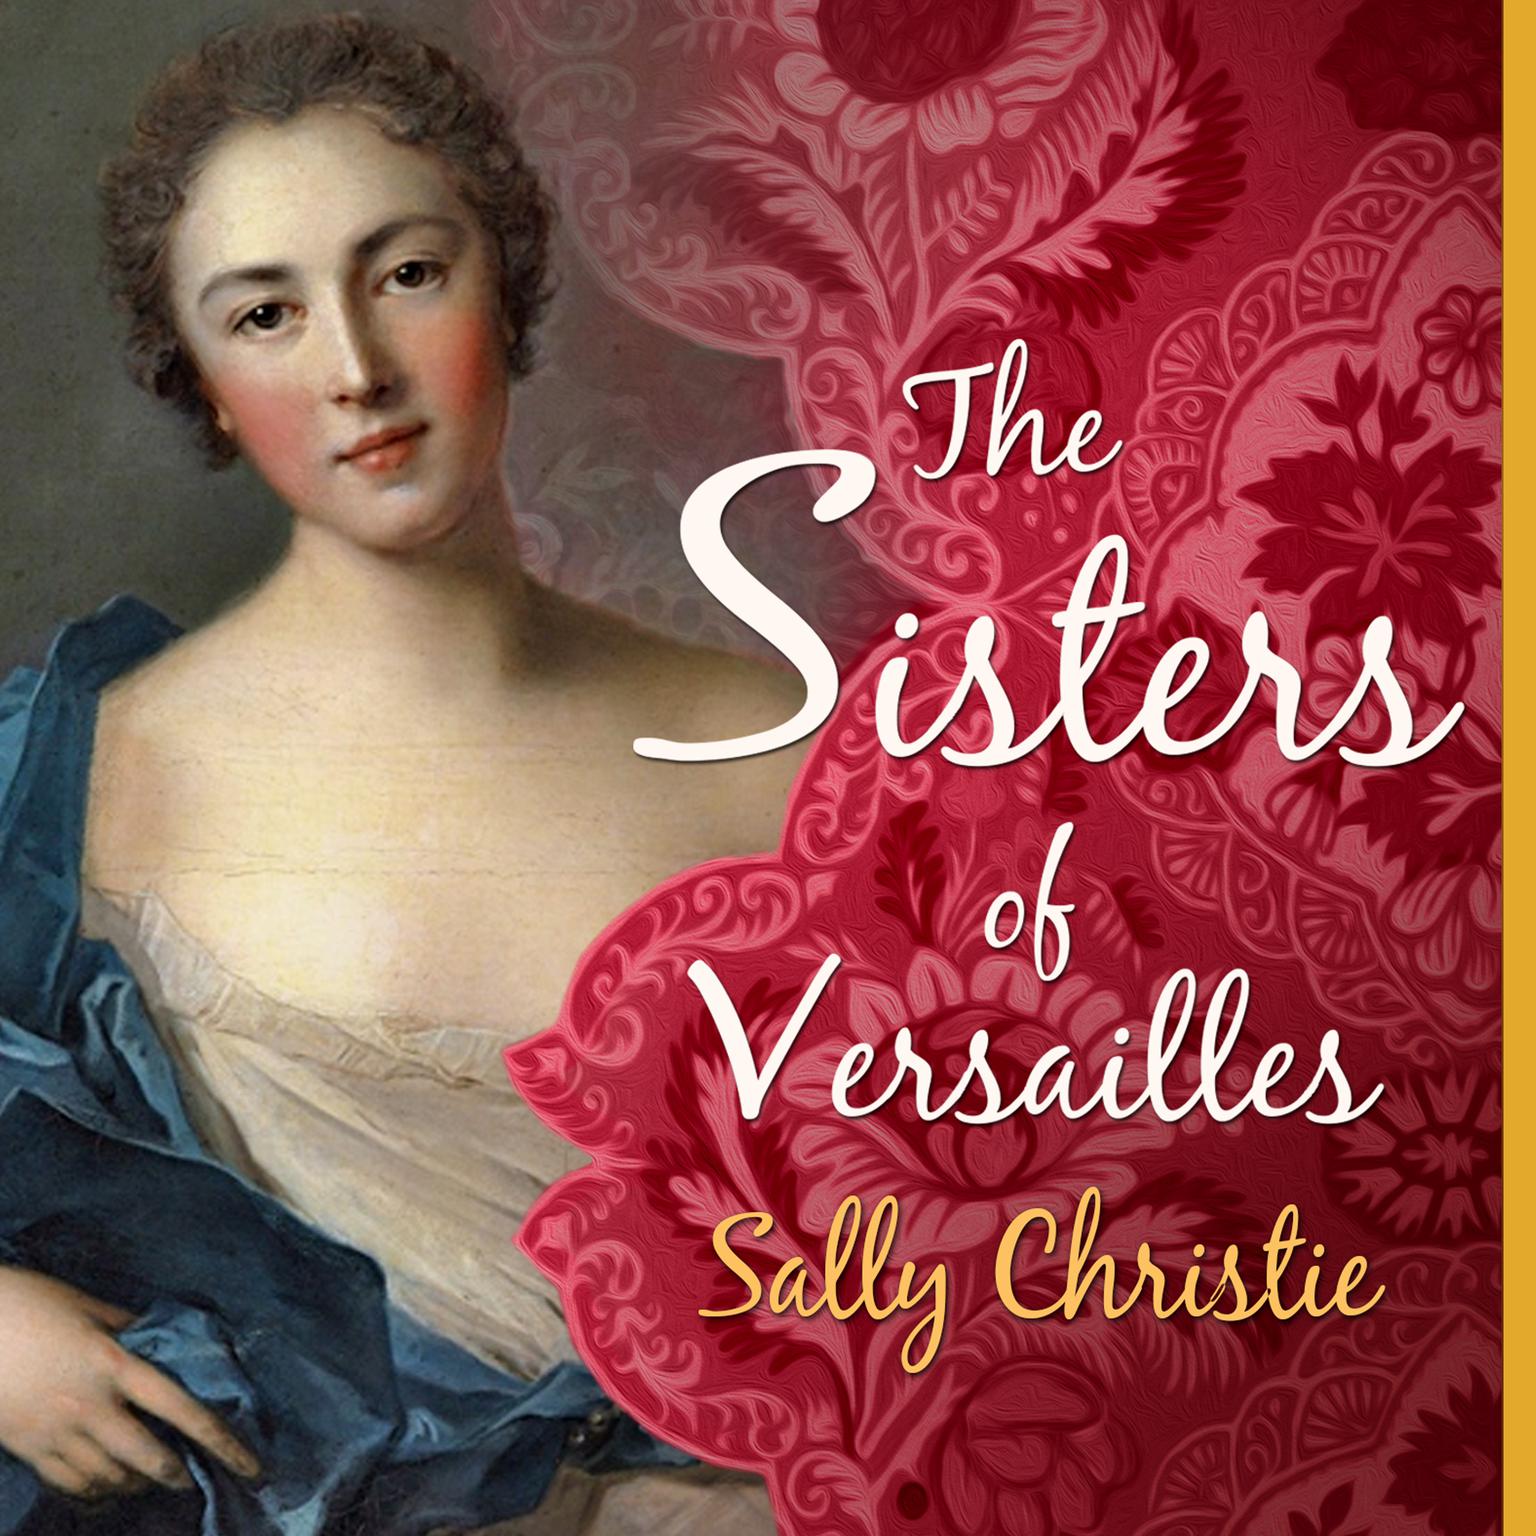 The Sisters of Versailles: A Novel Audiobook, by Sally Christie